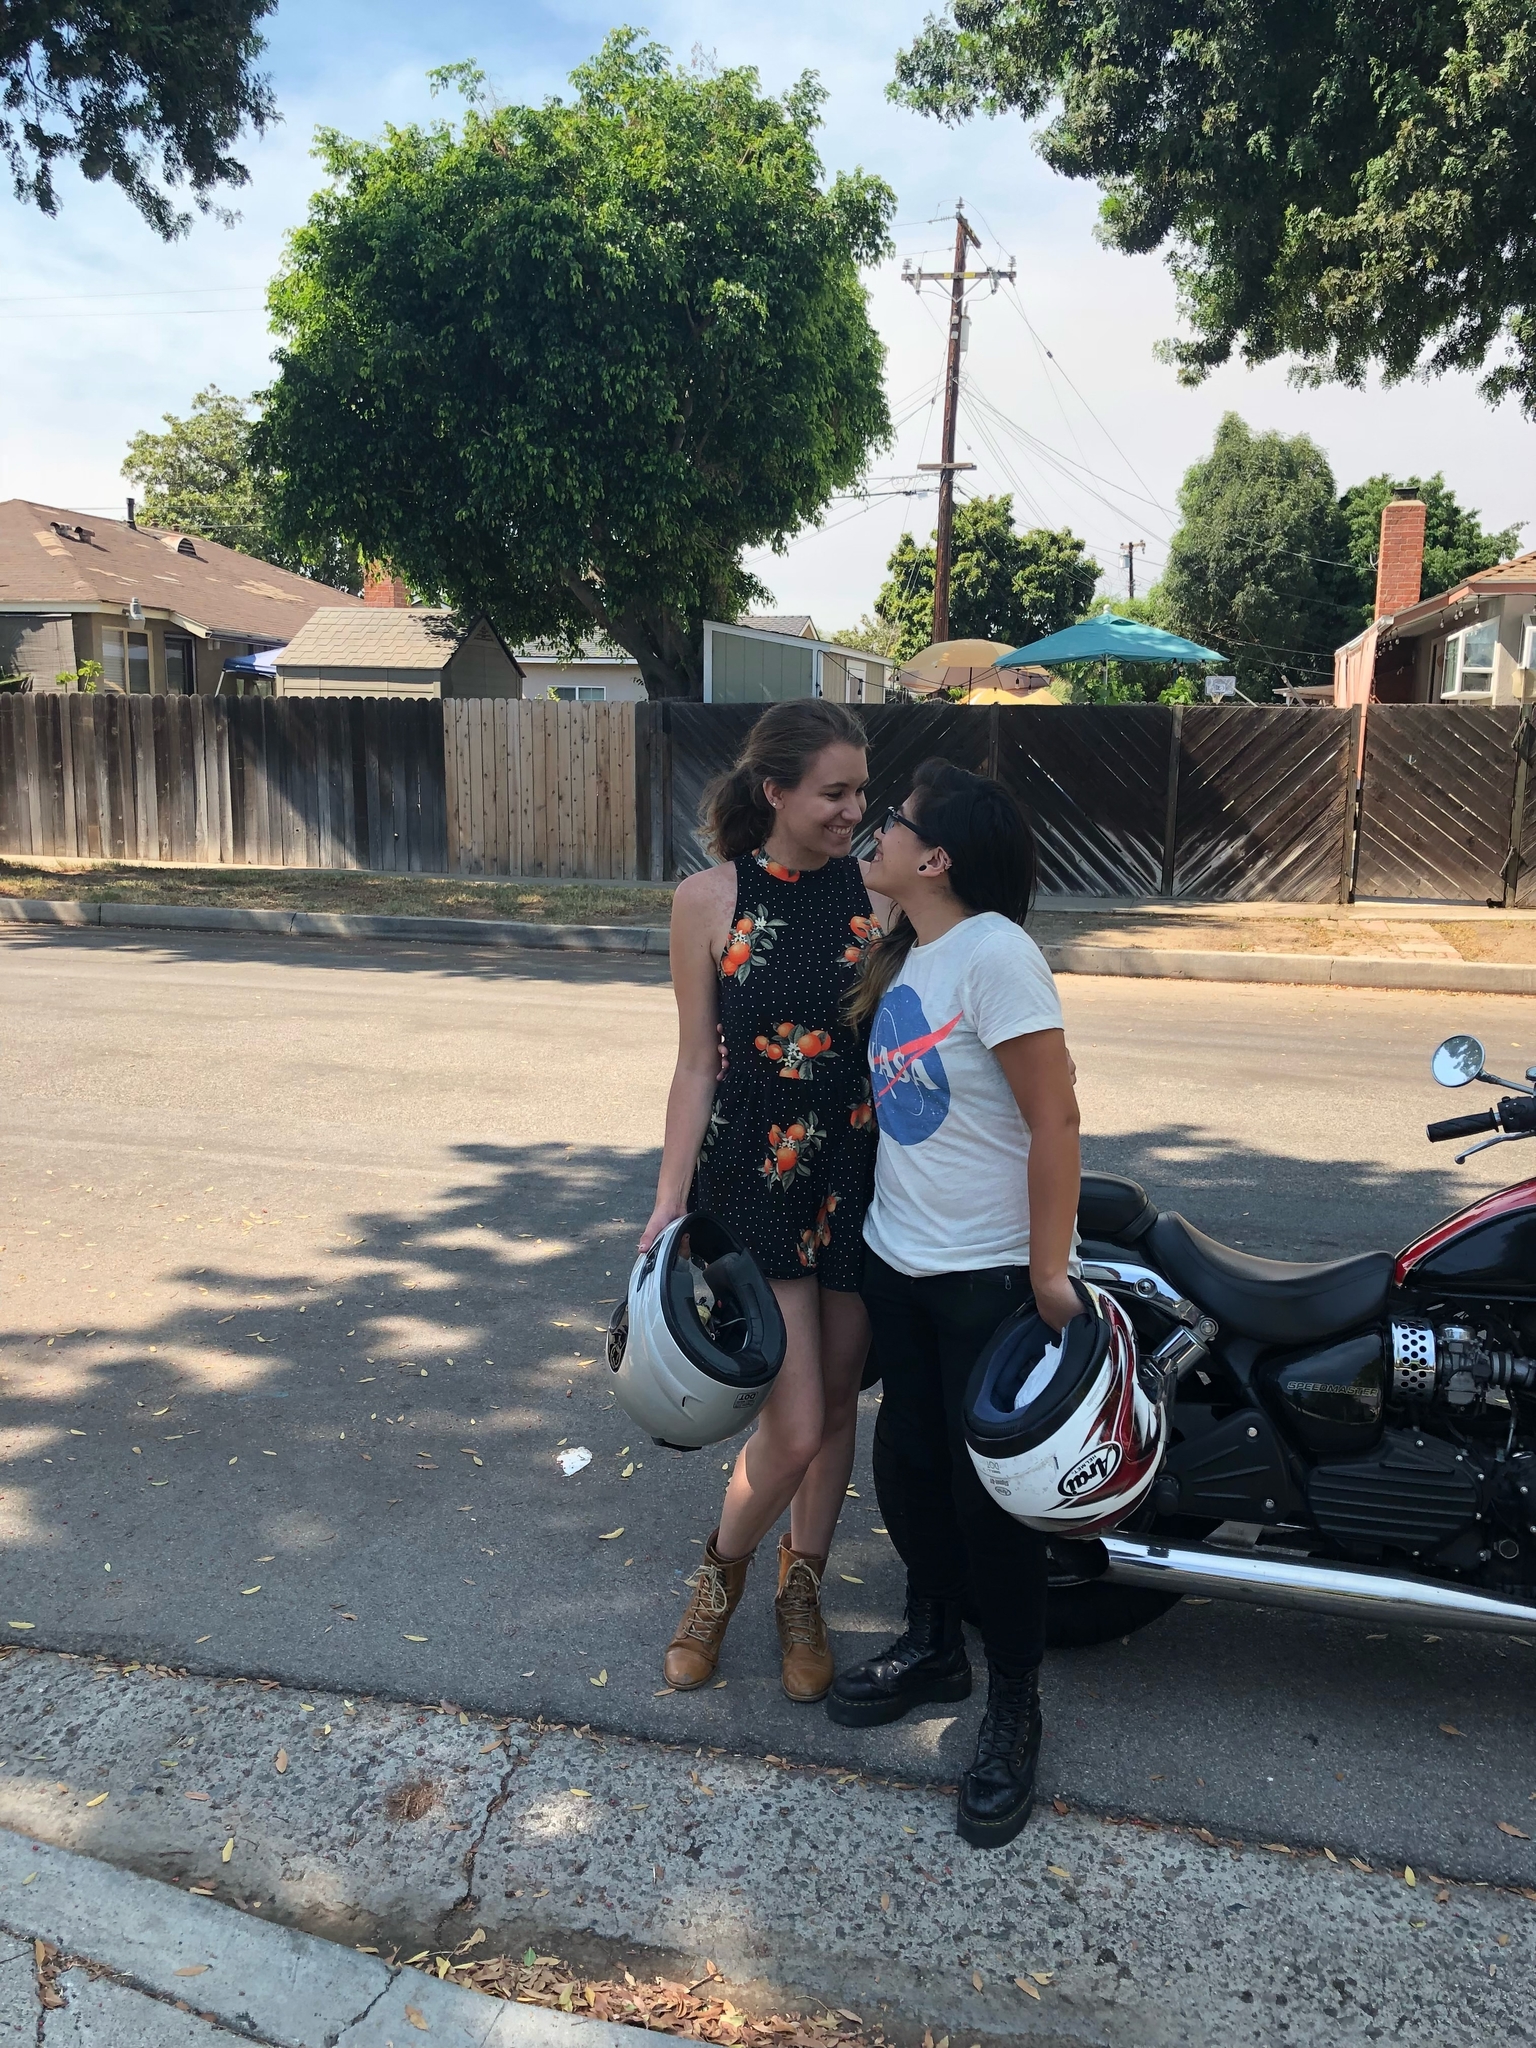 Jax & Haley with a motorcycle